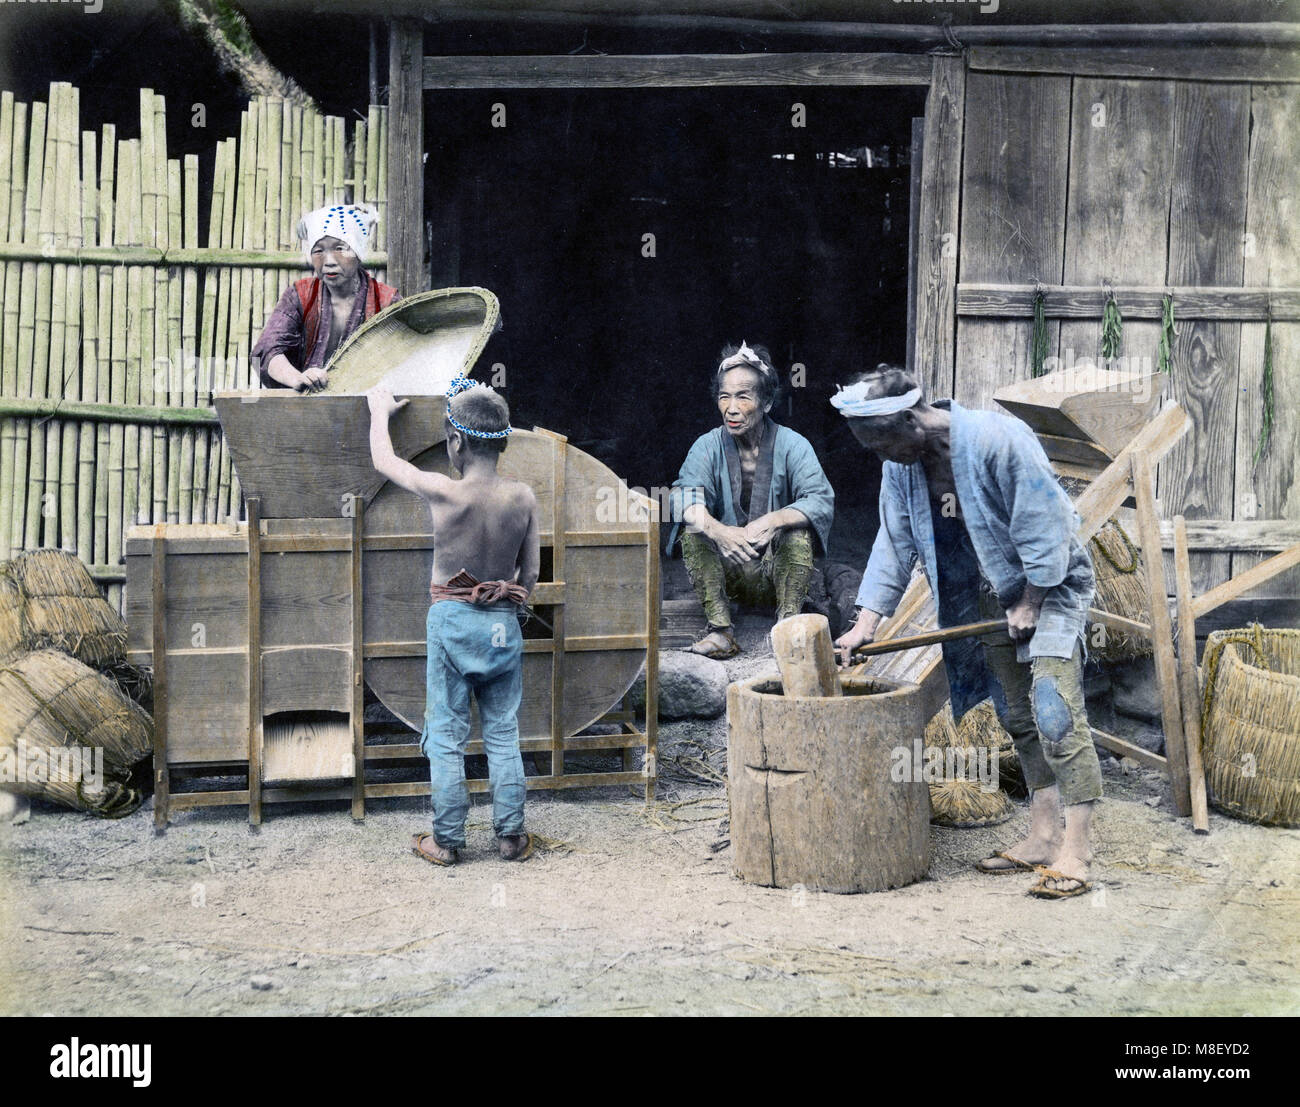 c.1880s Japan - cleaning and pounding rice Stock Photo